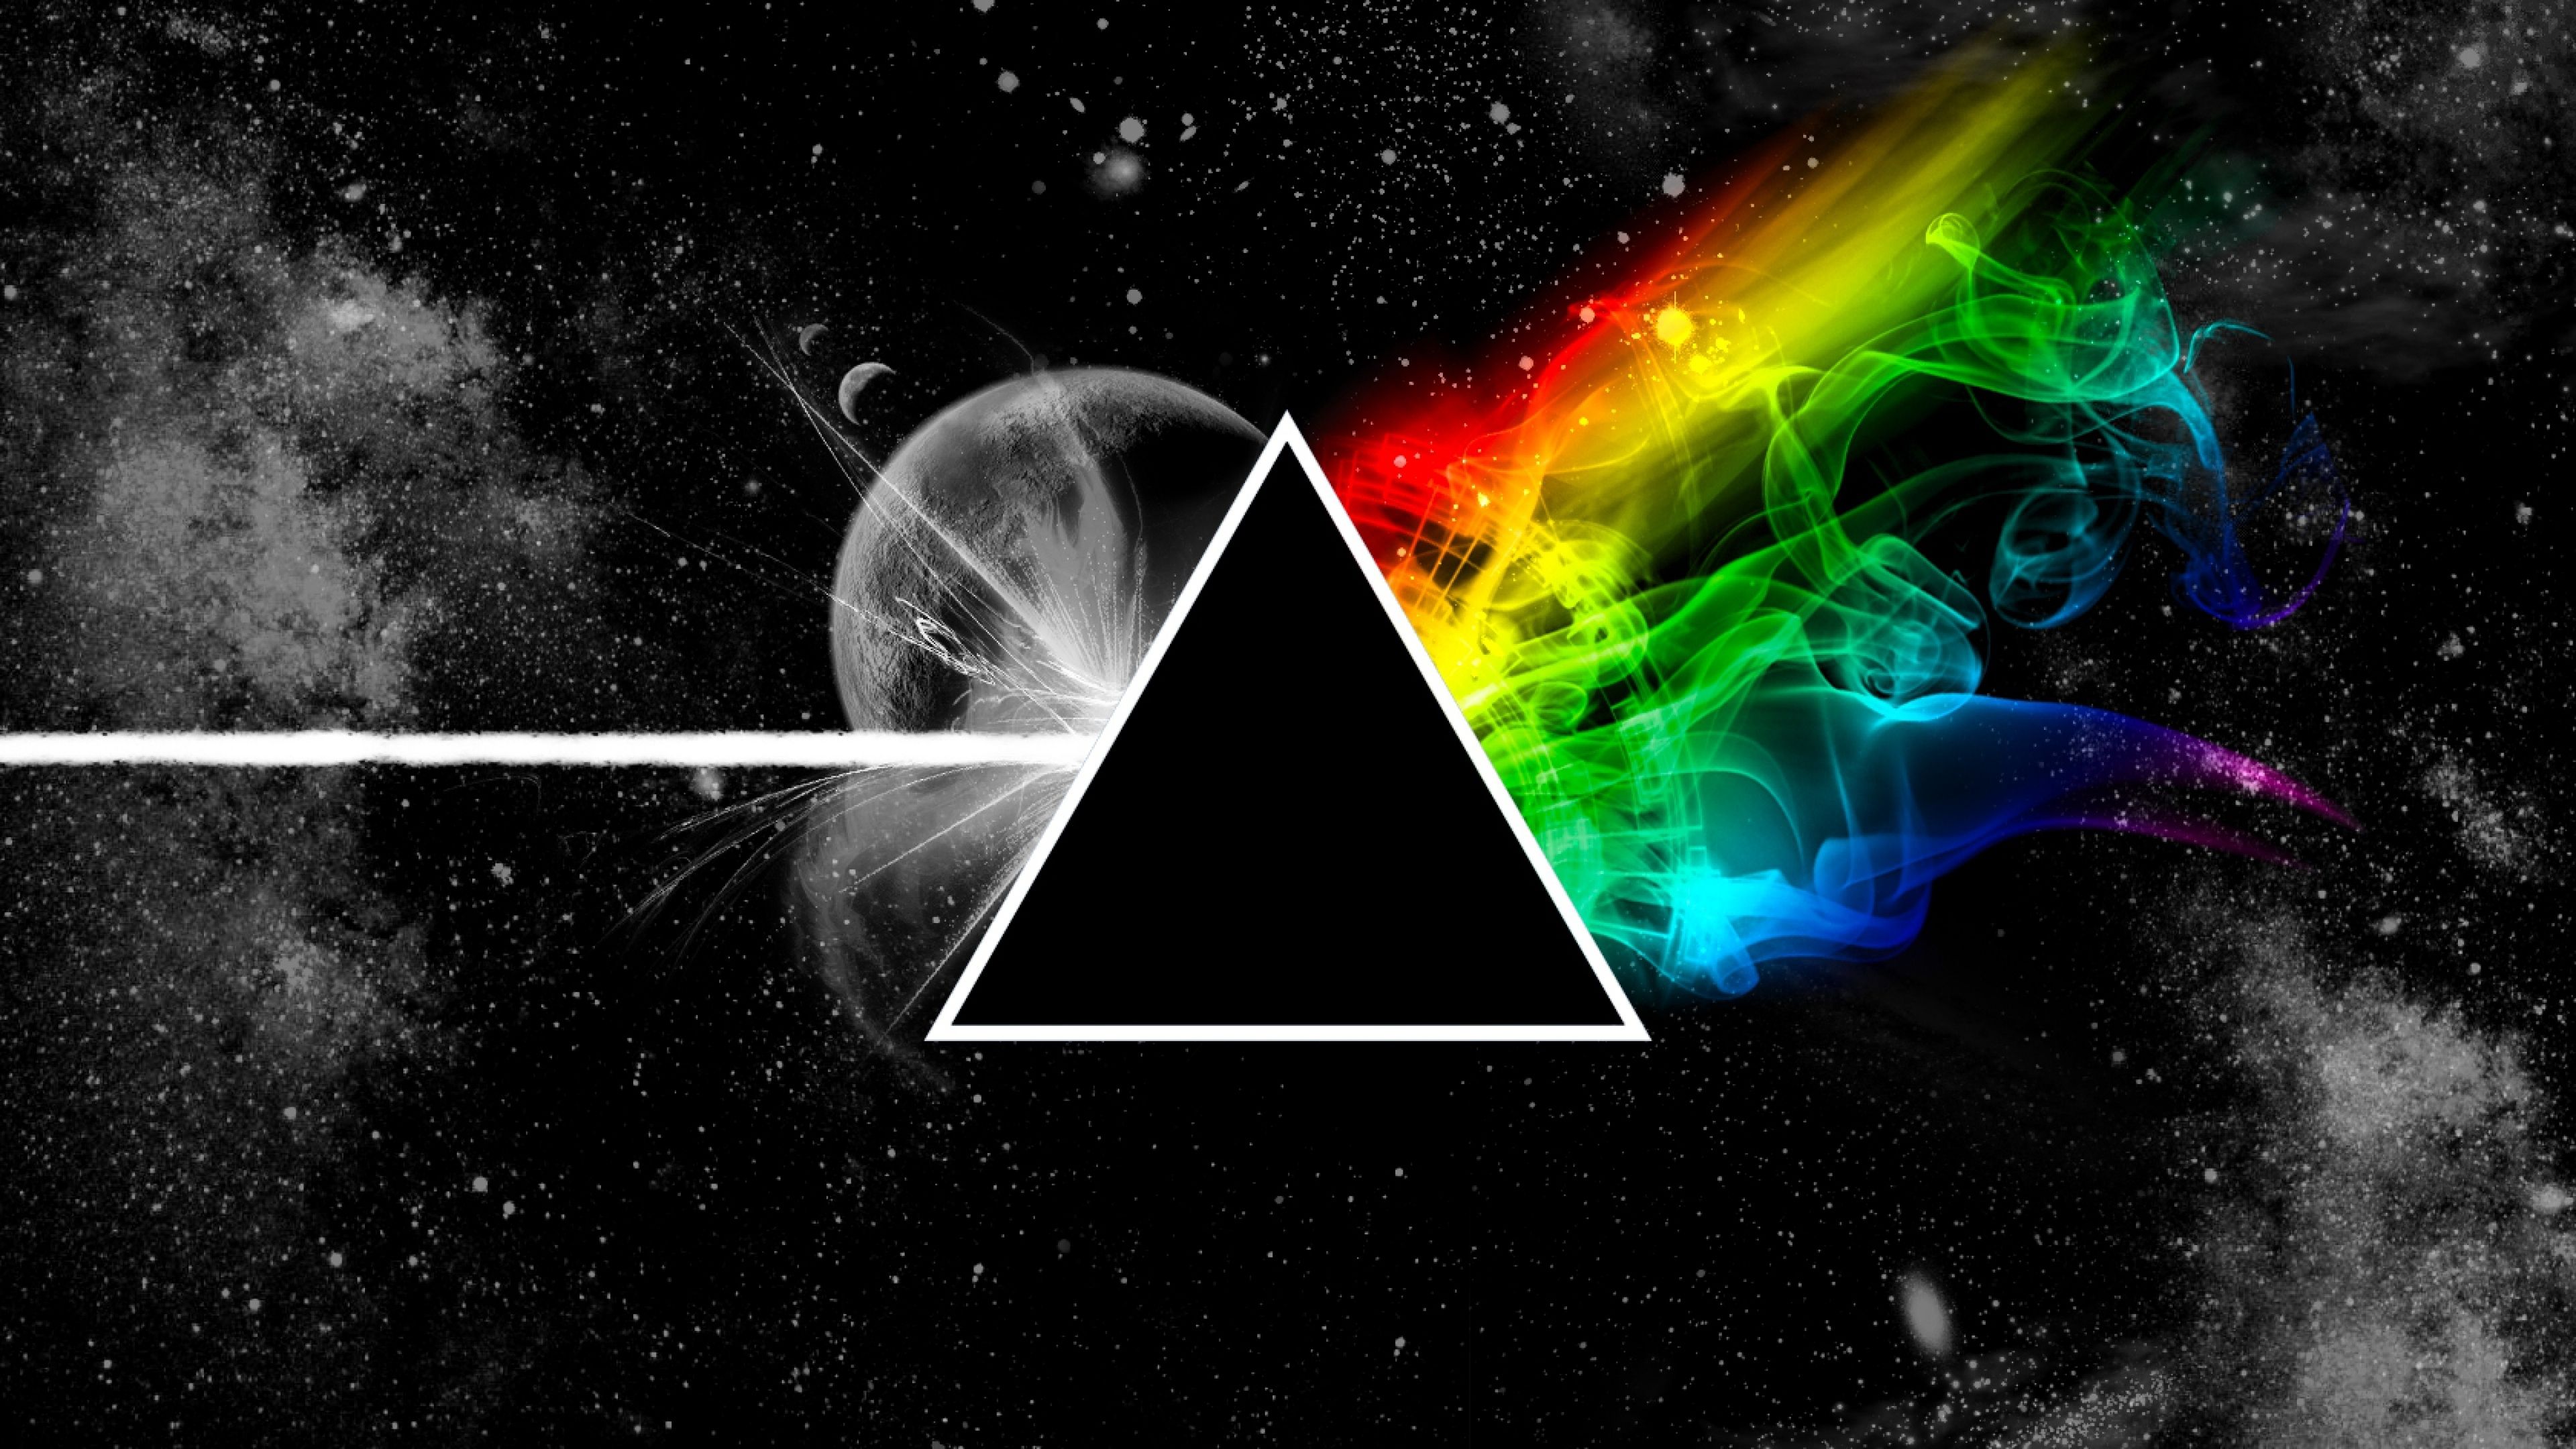 Download Wallpaper 3840x2160 Pink floyd, Triangle, Space, Planet